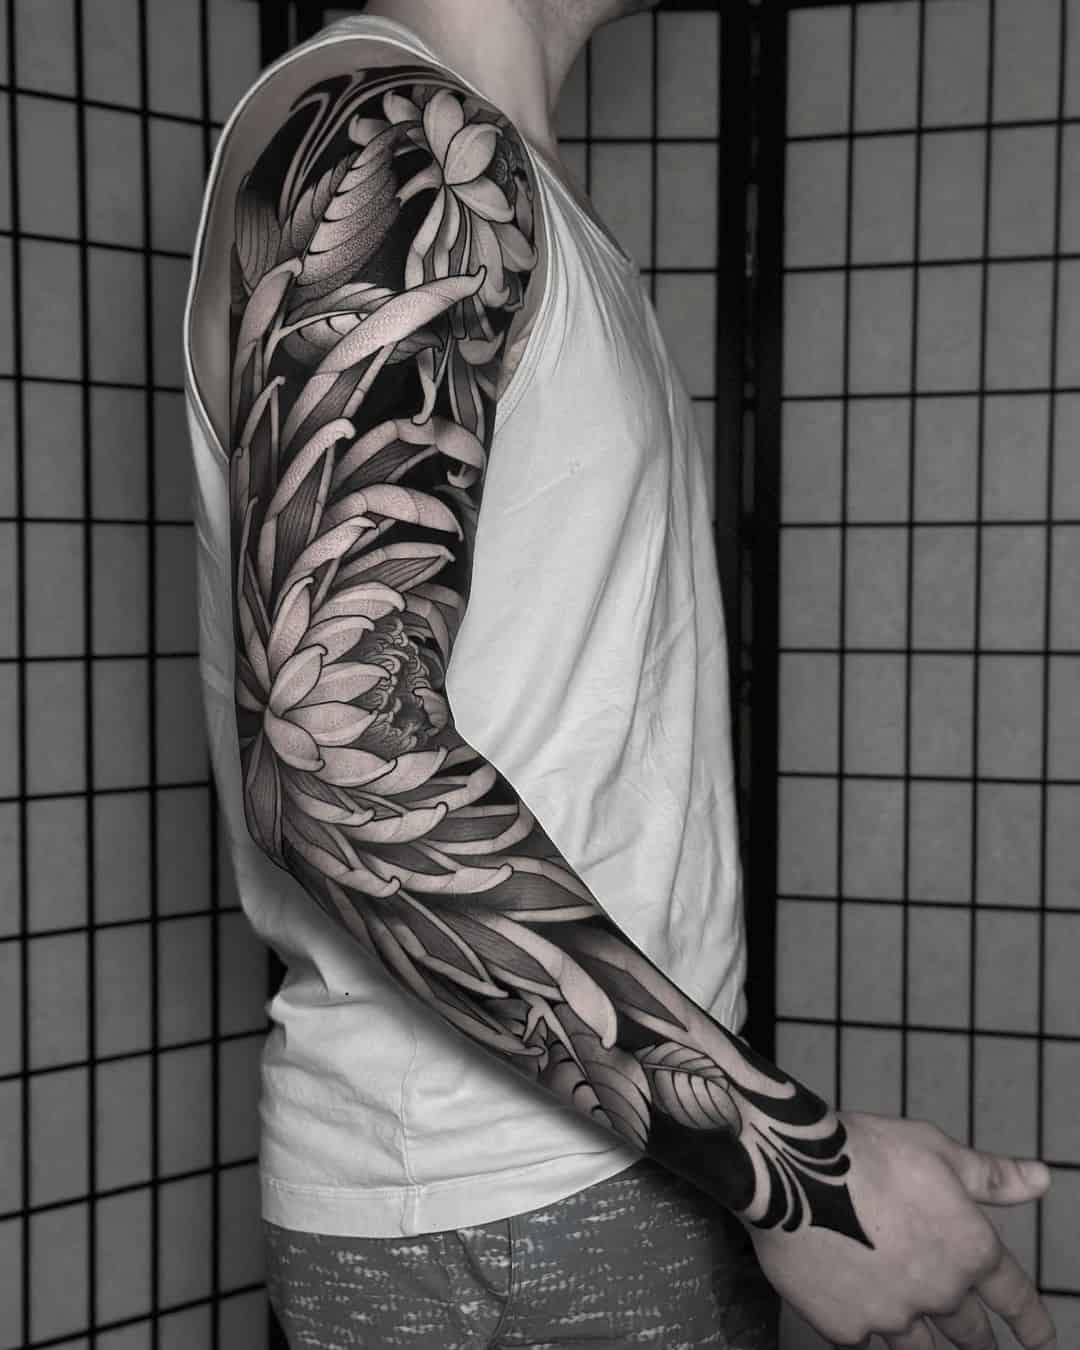 Sleeve Tattoos with Meaning: Expressing Art and Identity